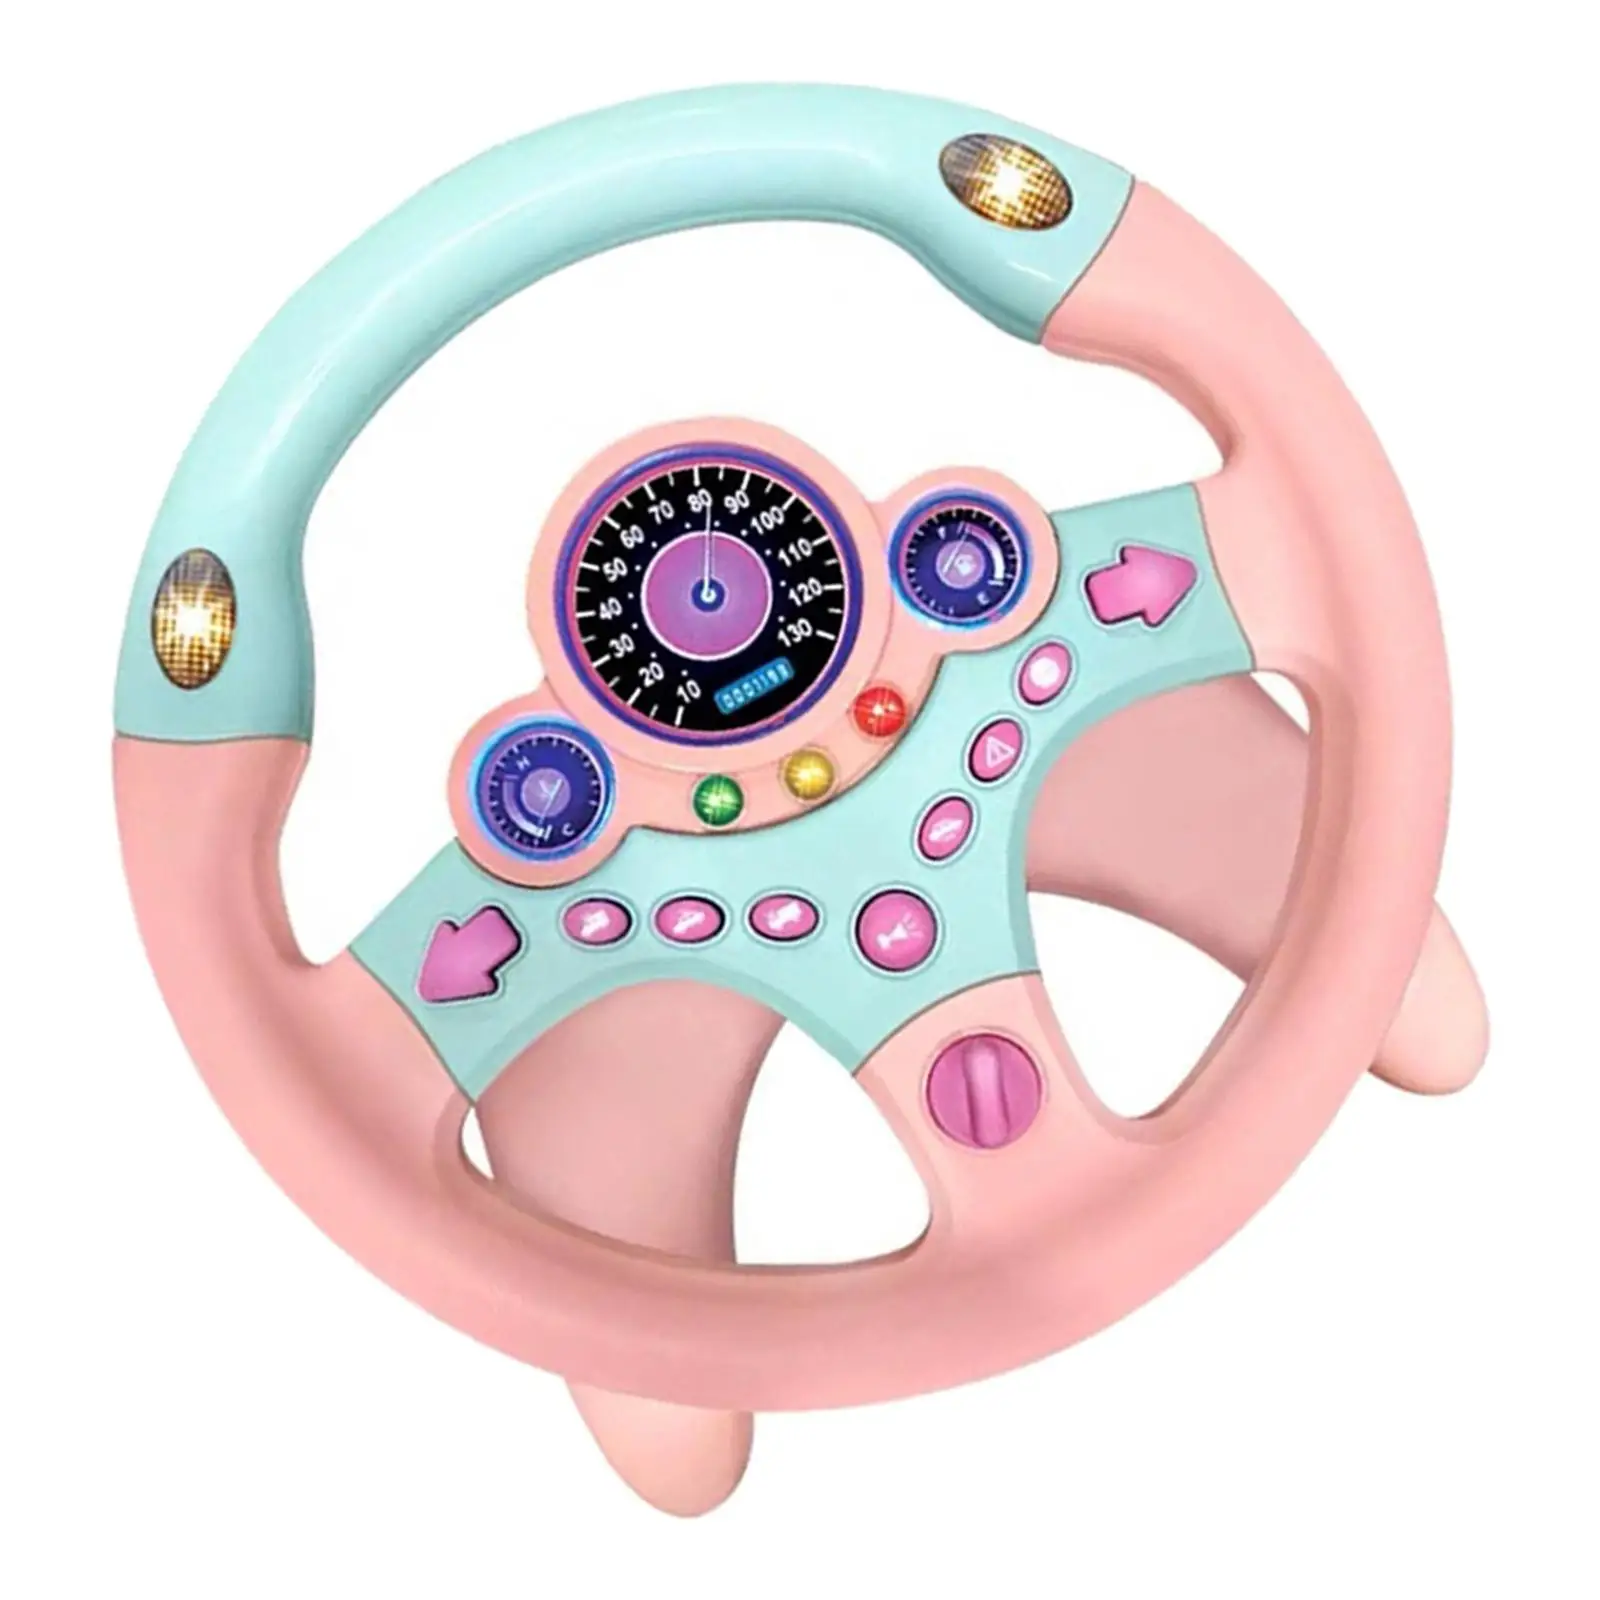 Simulated driving steering wheel copilot toy children educational sounding